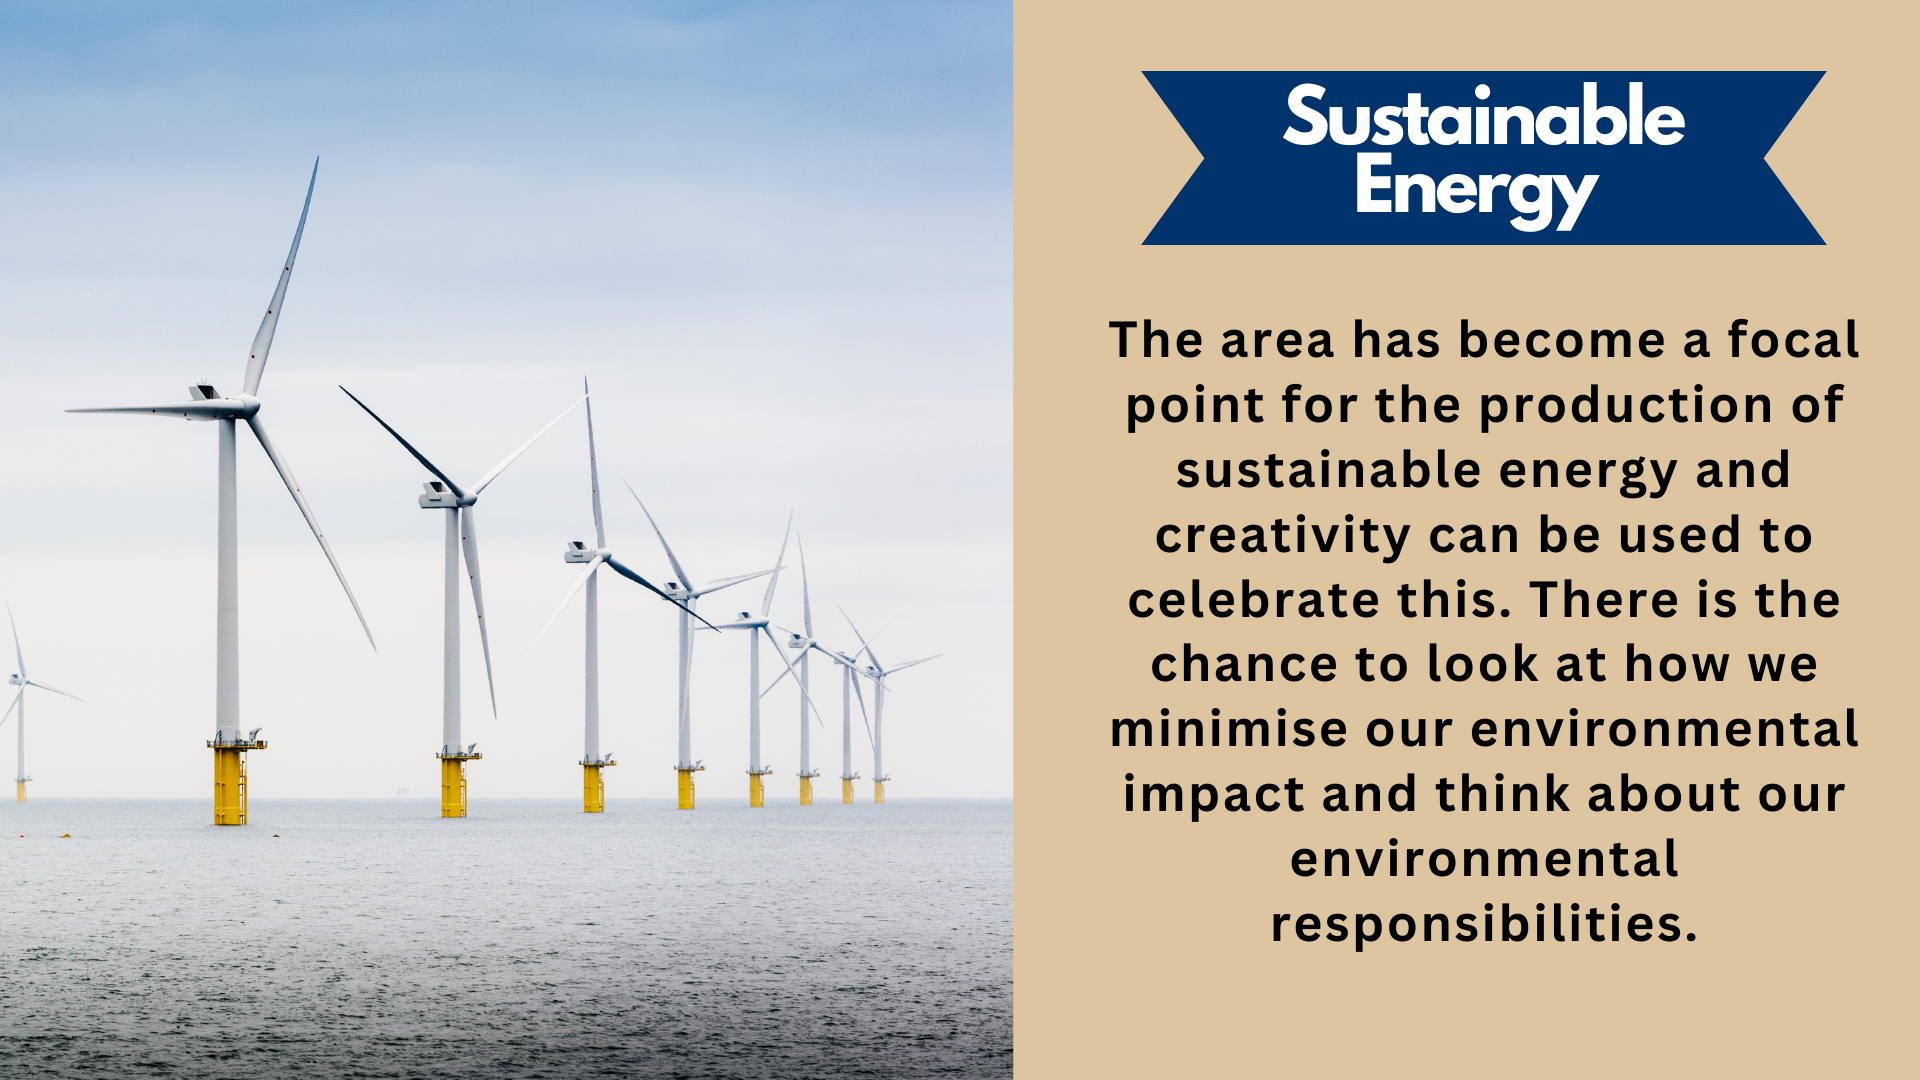 Sustainable Energy. The area has become a focal point for the production of sustainable energy and creativity can be used to celebrate this. There is the chance to look at how we minimise our environmental impact and think about our environmental responsibilities.